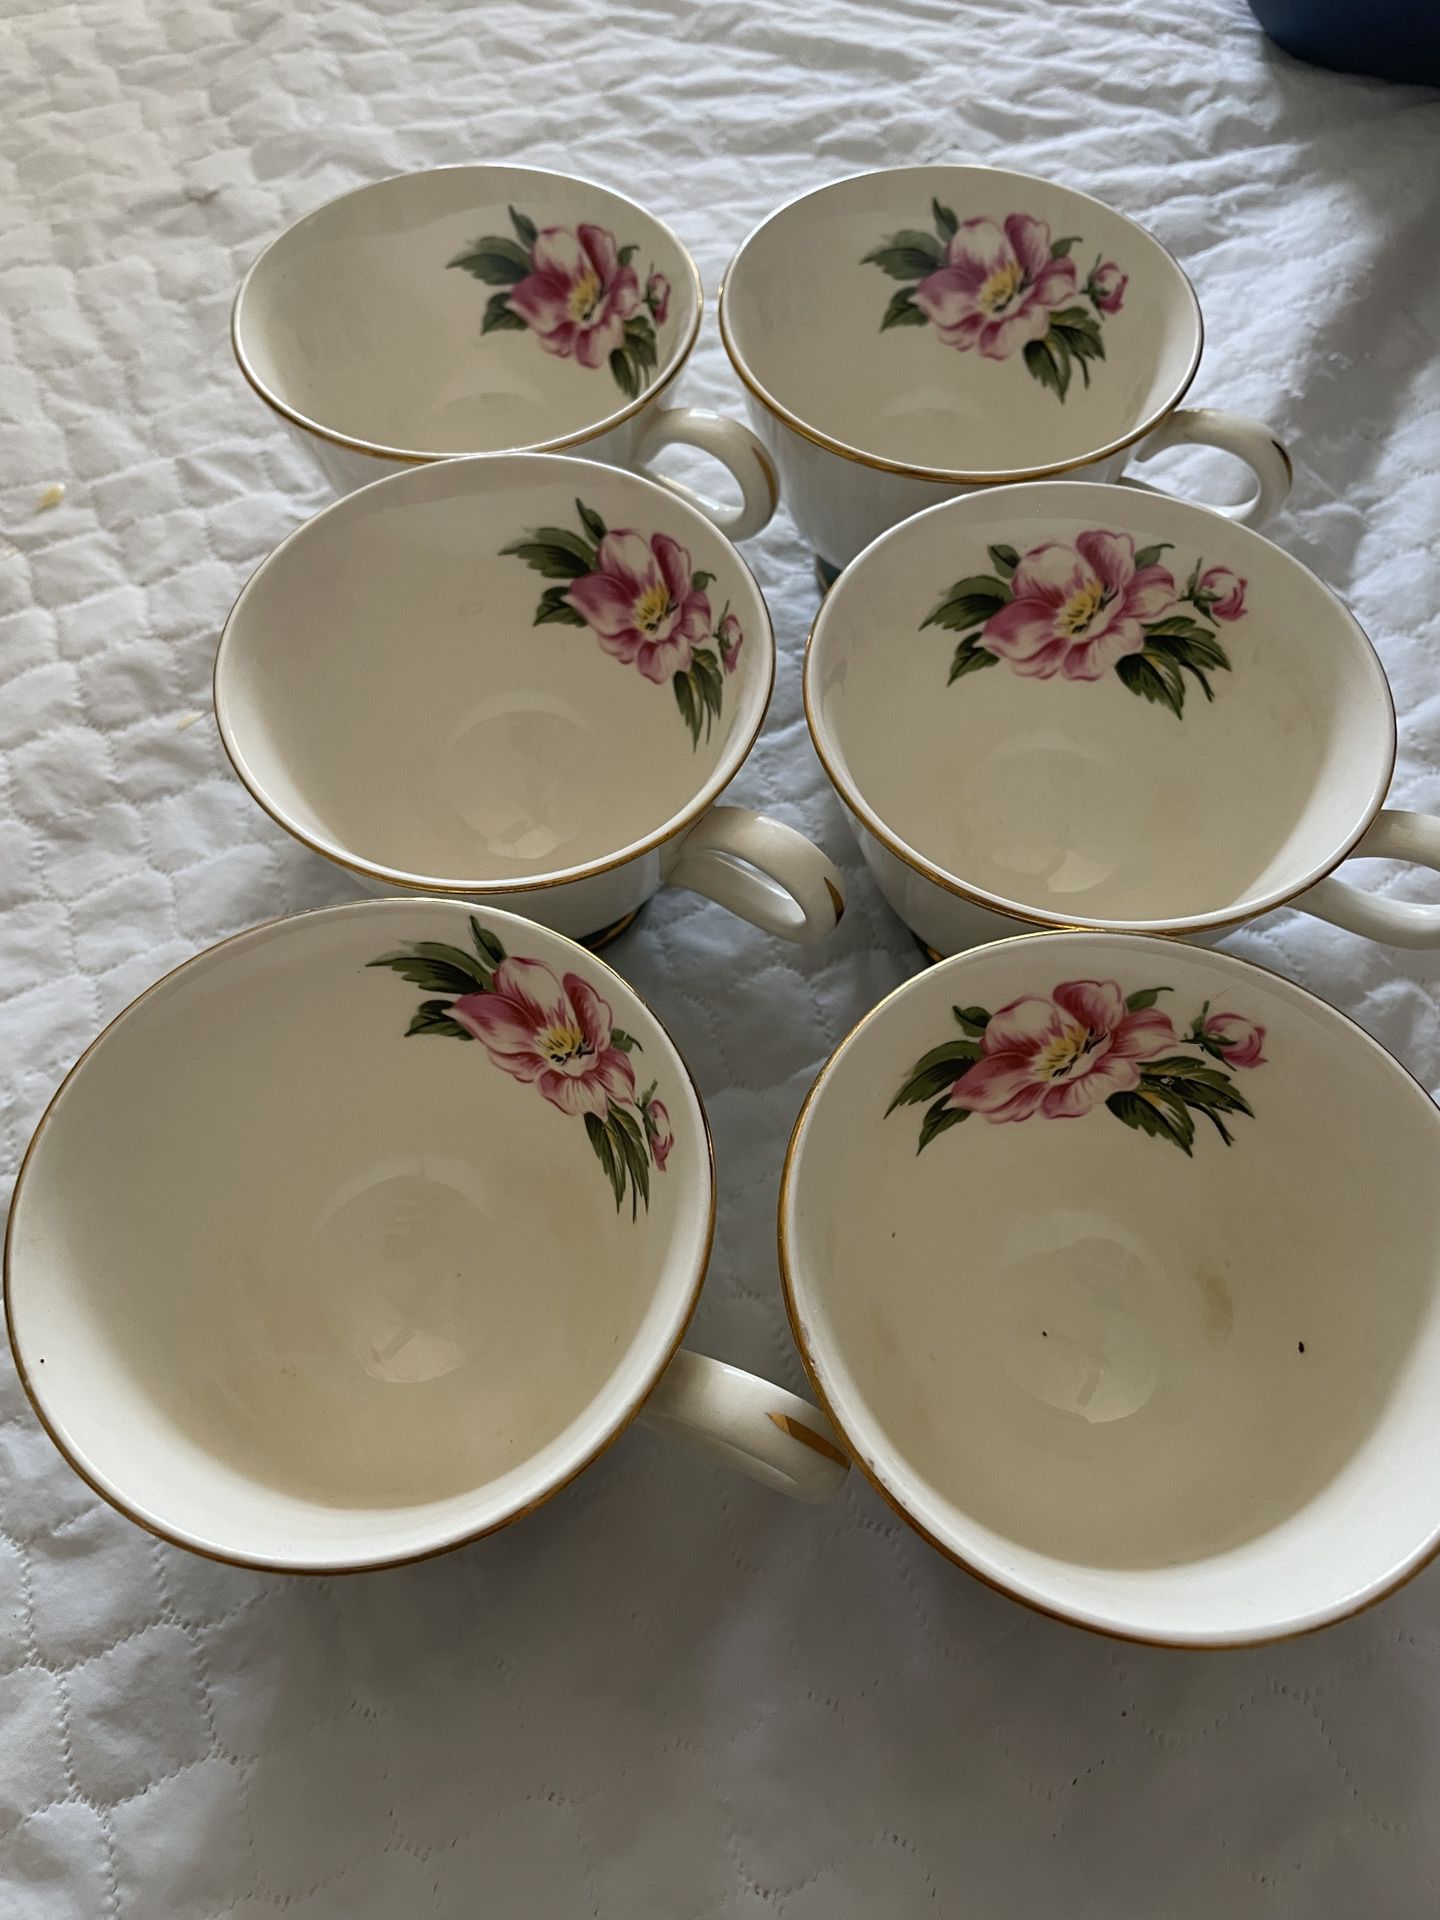 homer laughlin china vintage- Green Floral Tea Cups With Gold Trim - 6 Cups 